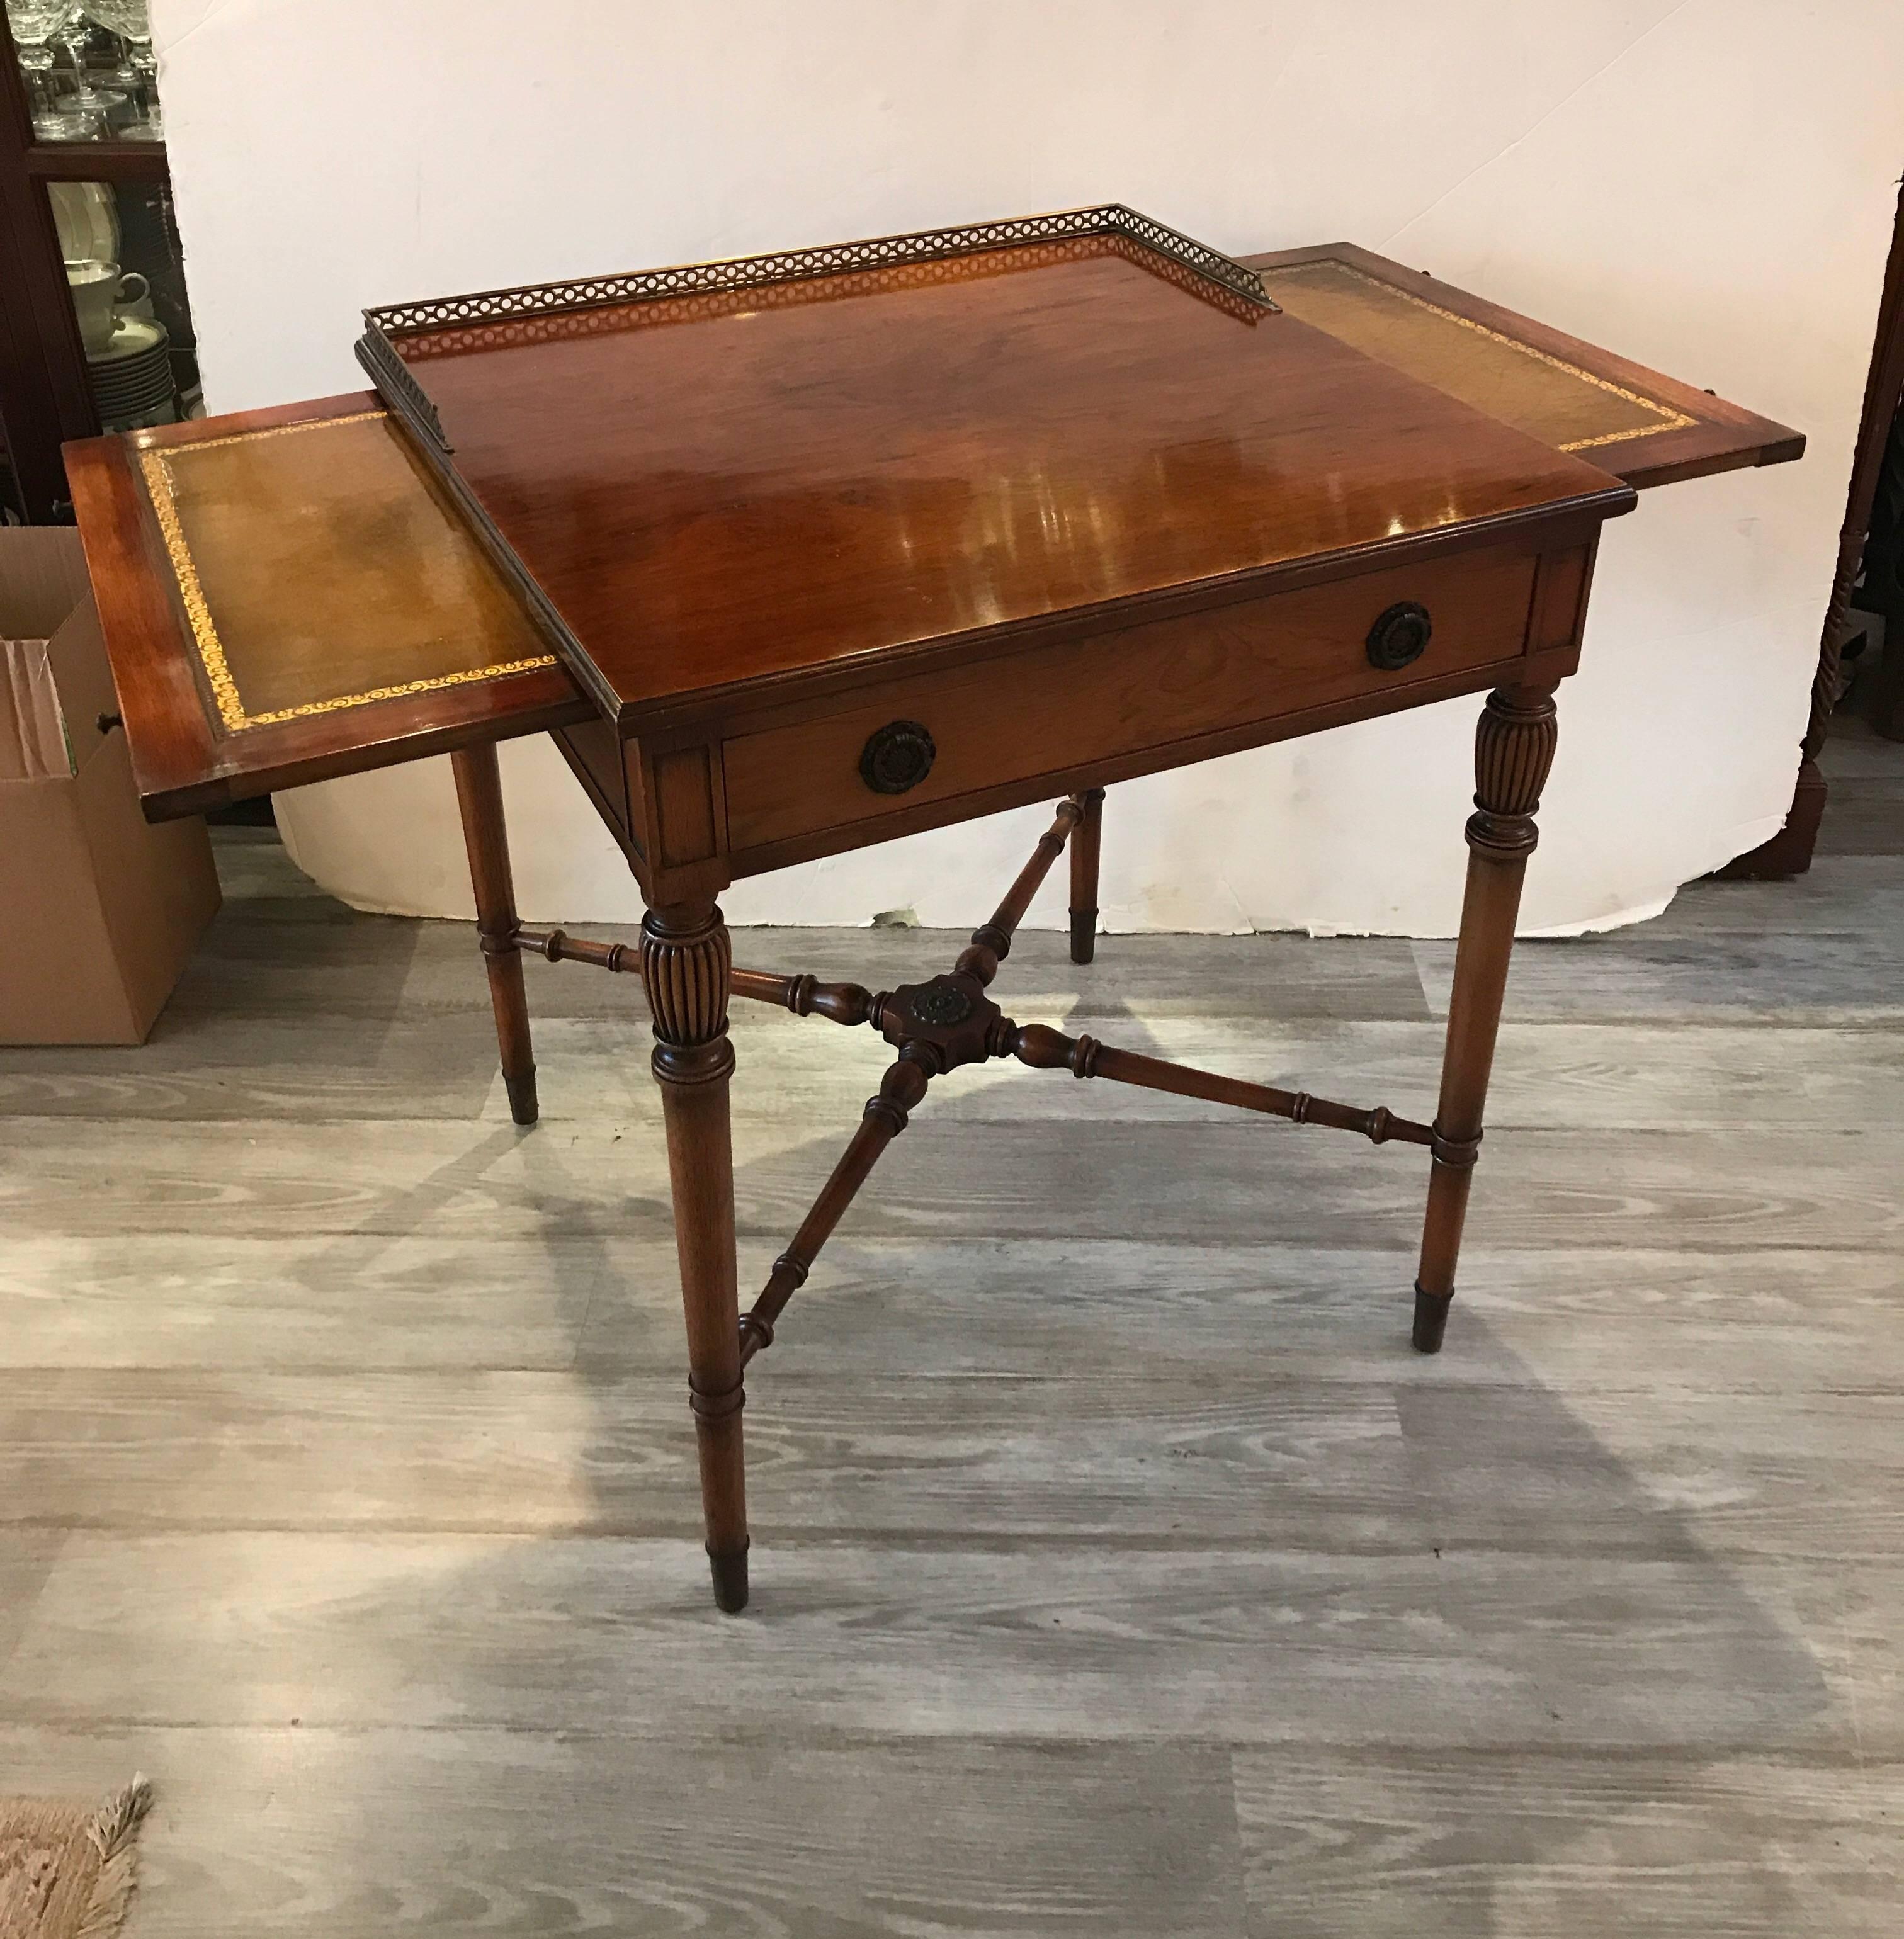 Graceful rosewood and mahogany square side table with brass pierced gallery edge. The drawer top with two side pull out trays with original olive leather and gilt tooled panels. The hand carved tapering legs with X stretcher base. This table is a